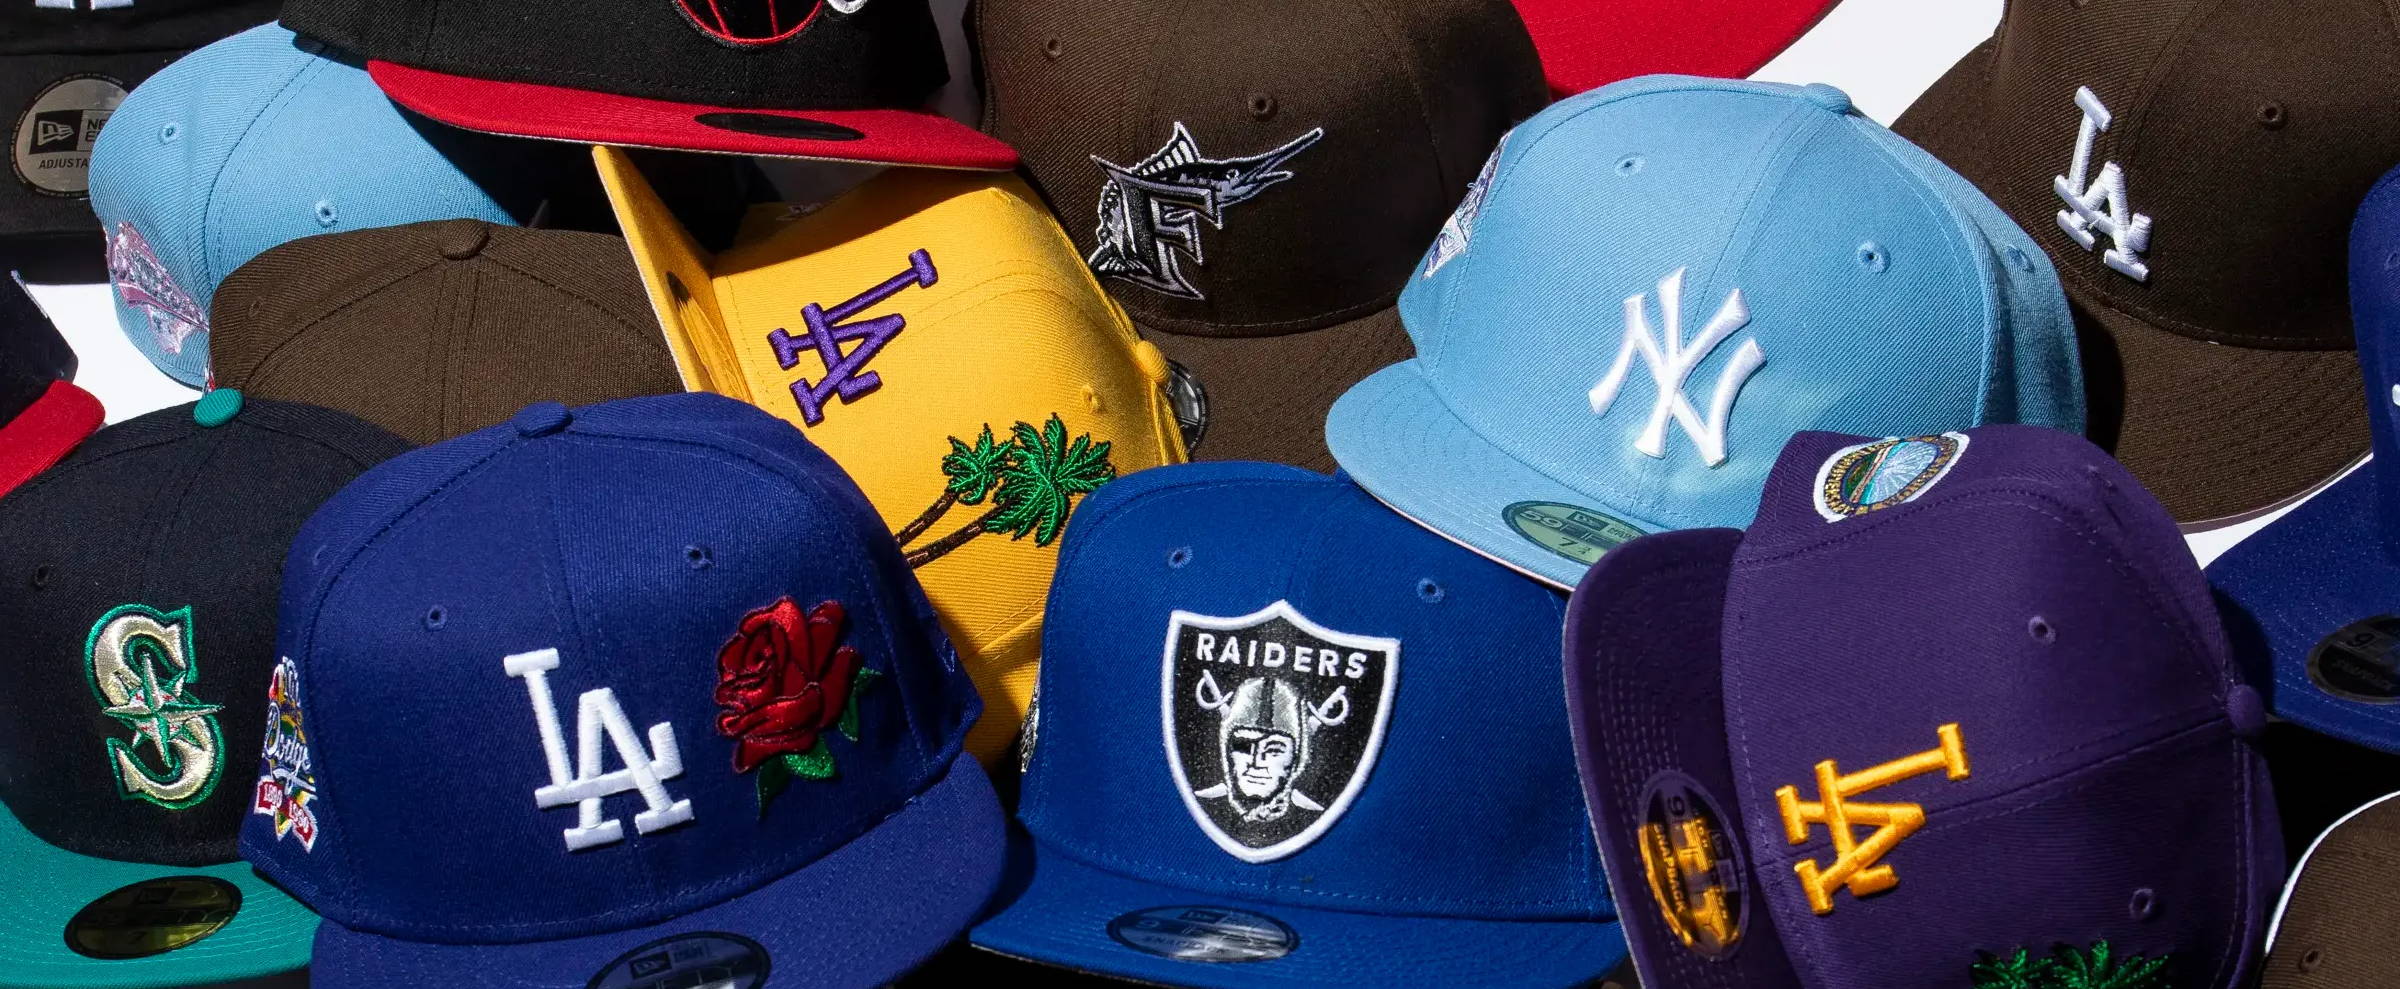 several colors and styles of new era caps scattered